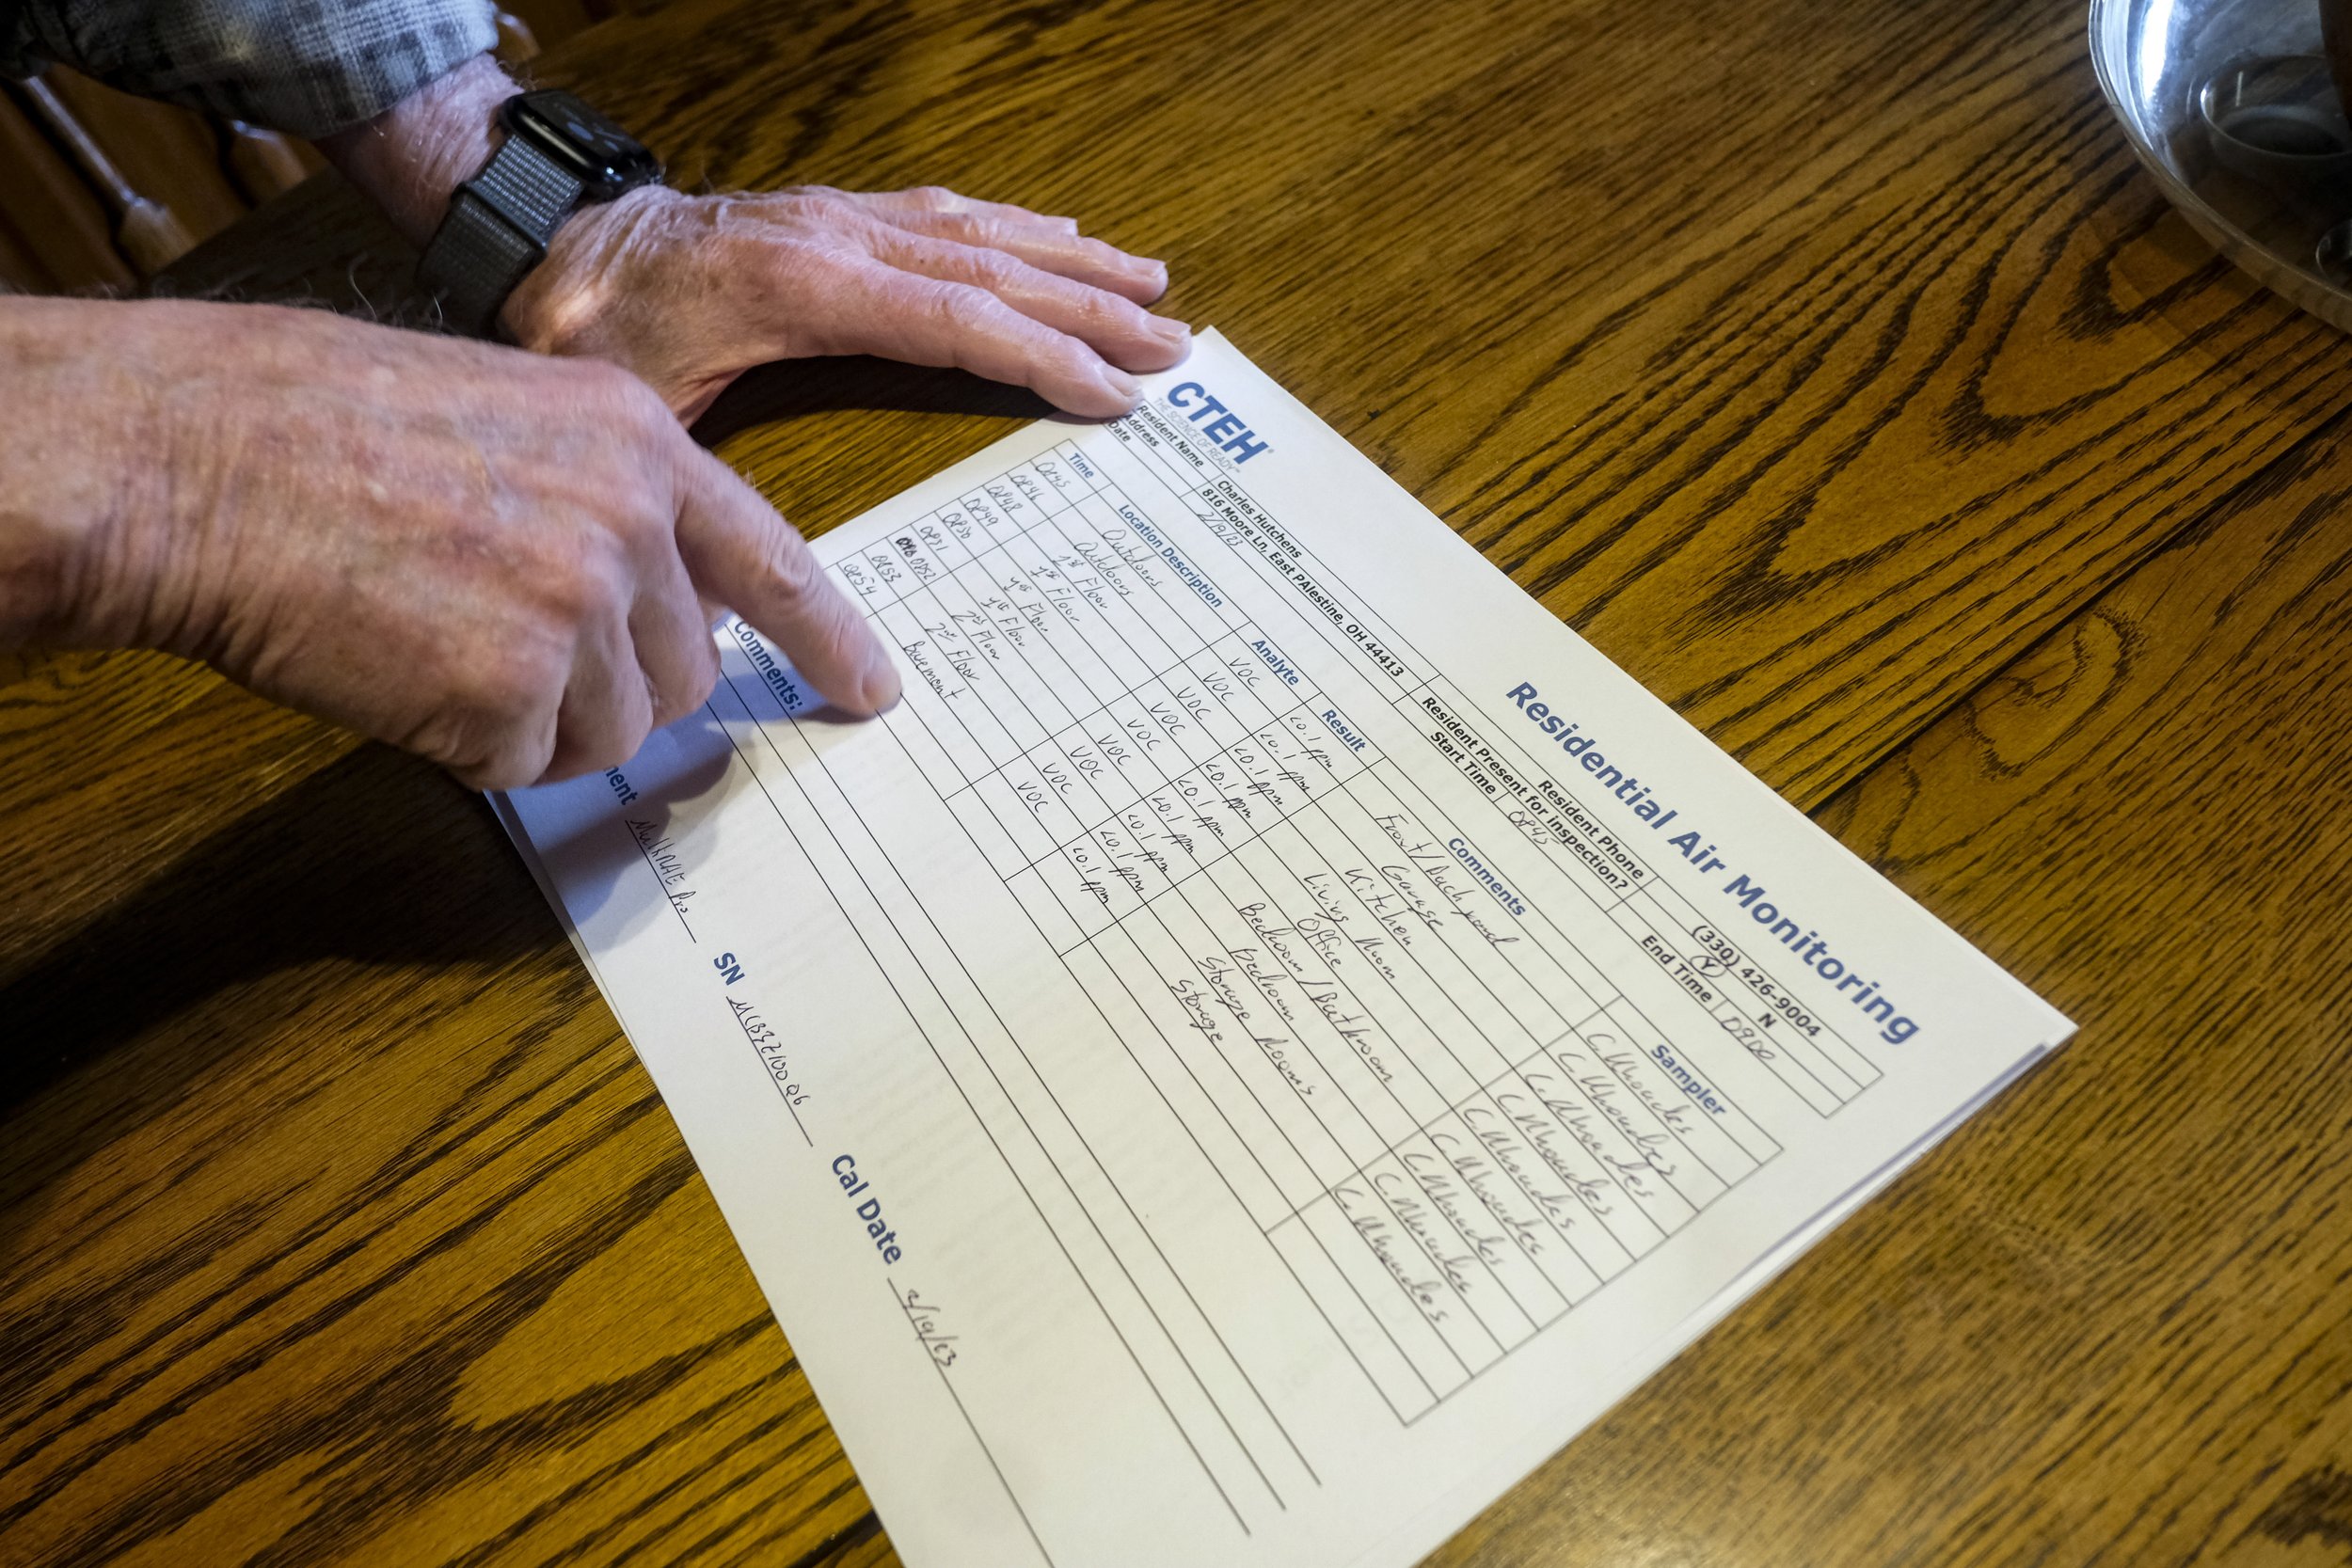  Charlie Hutchens shows the test result papers following having the soil and the air  at his home tested by the EPA in East Palestine on Saturday, February 19, 2023. Charlie was one of hundreds off residents on the Eastern side of town who were force